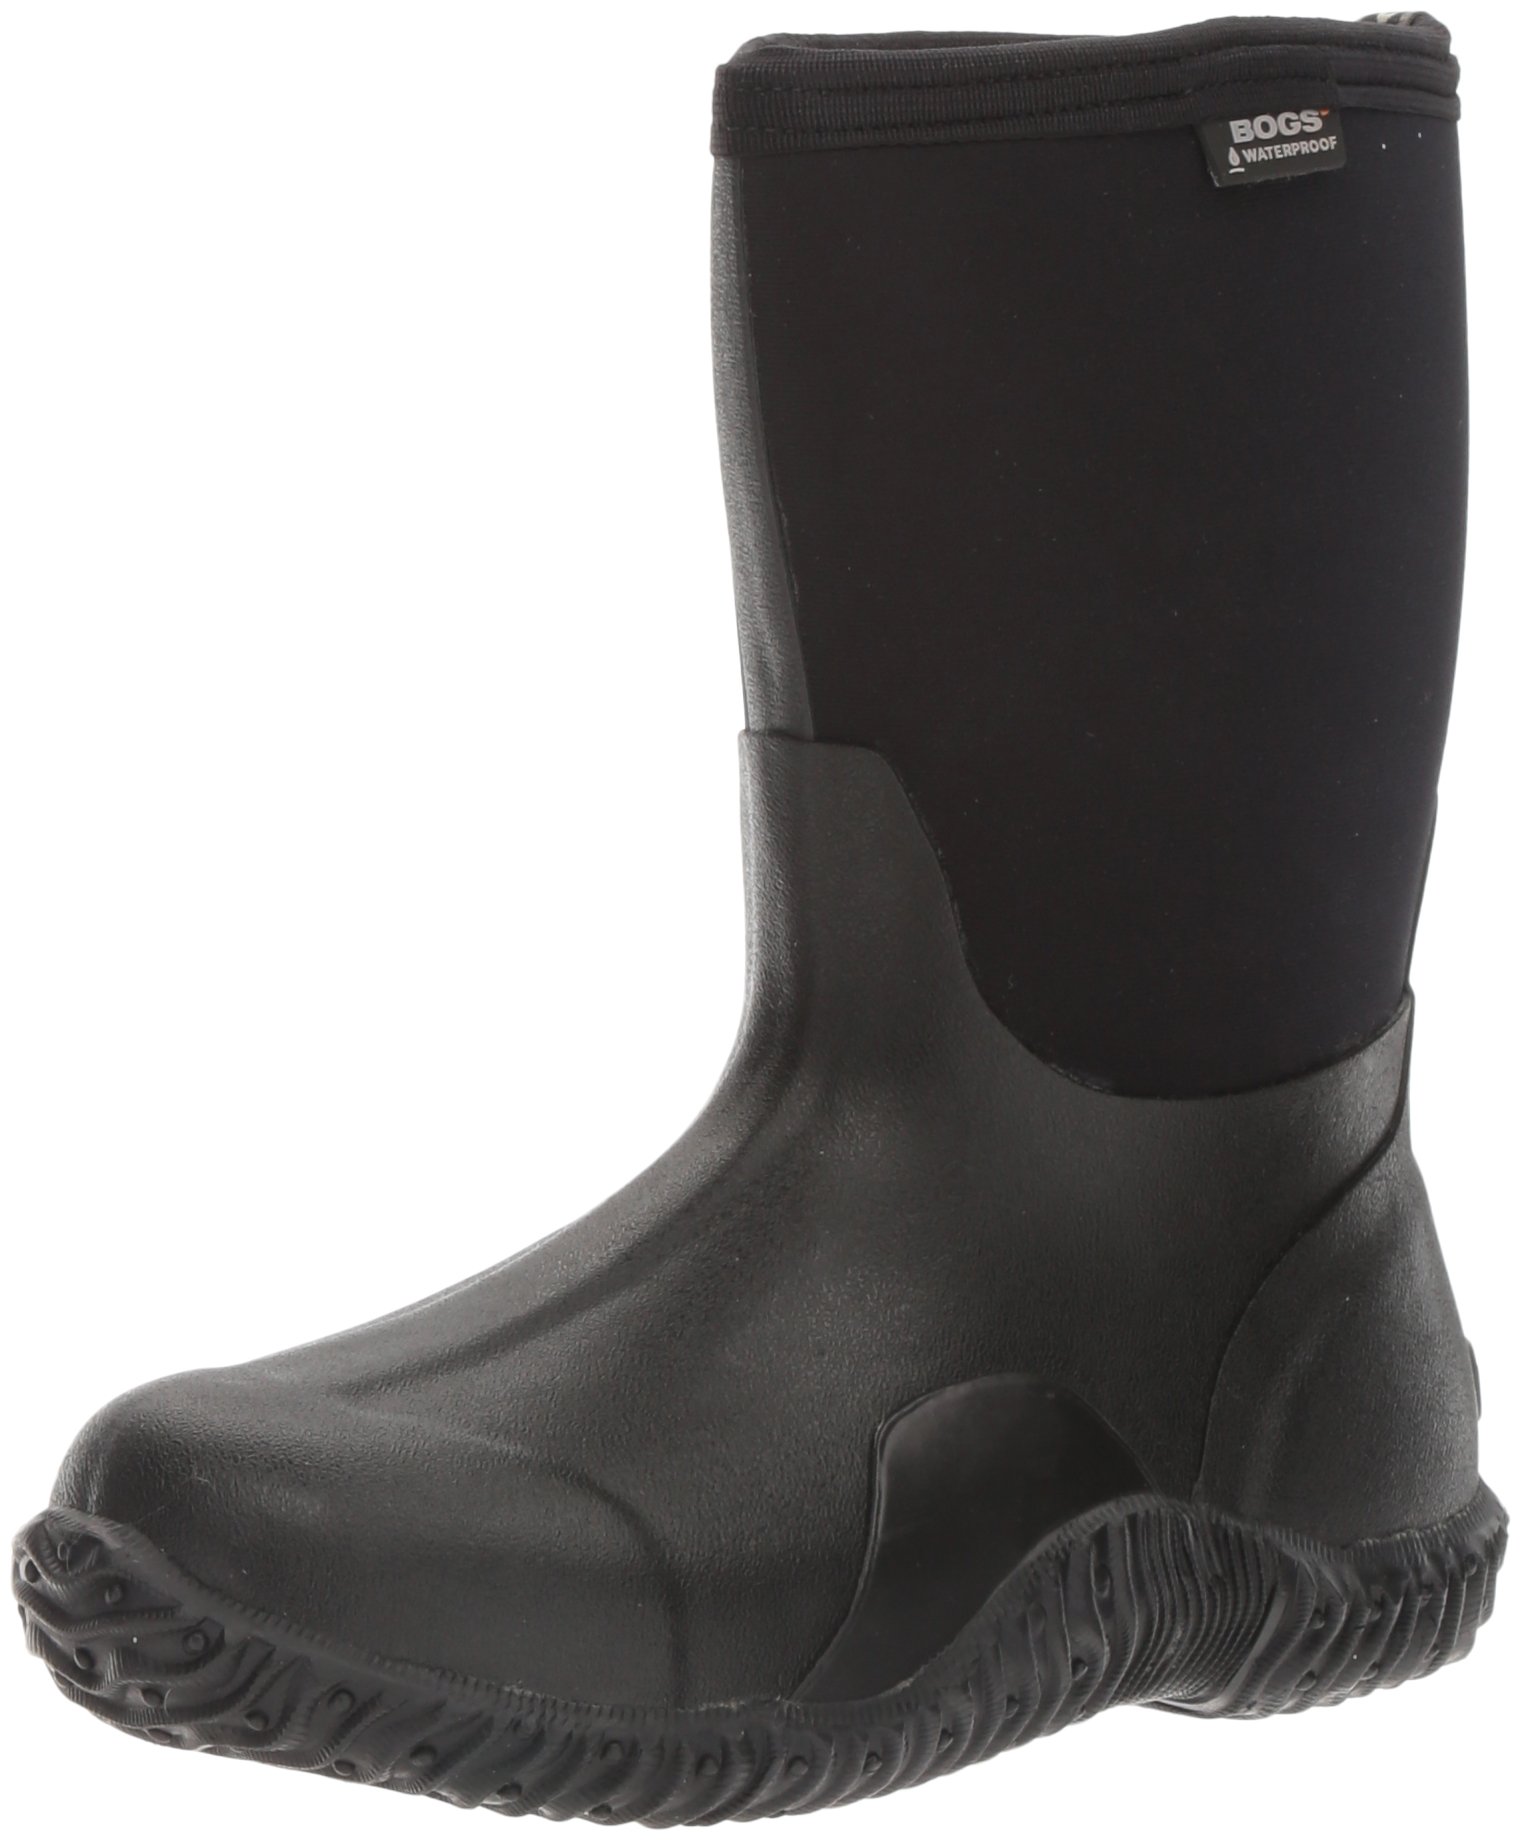 BOGS Womens Classic Mid Boot